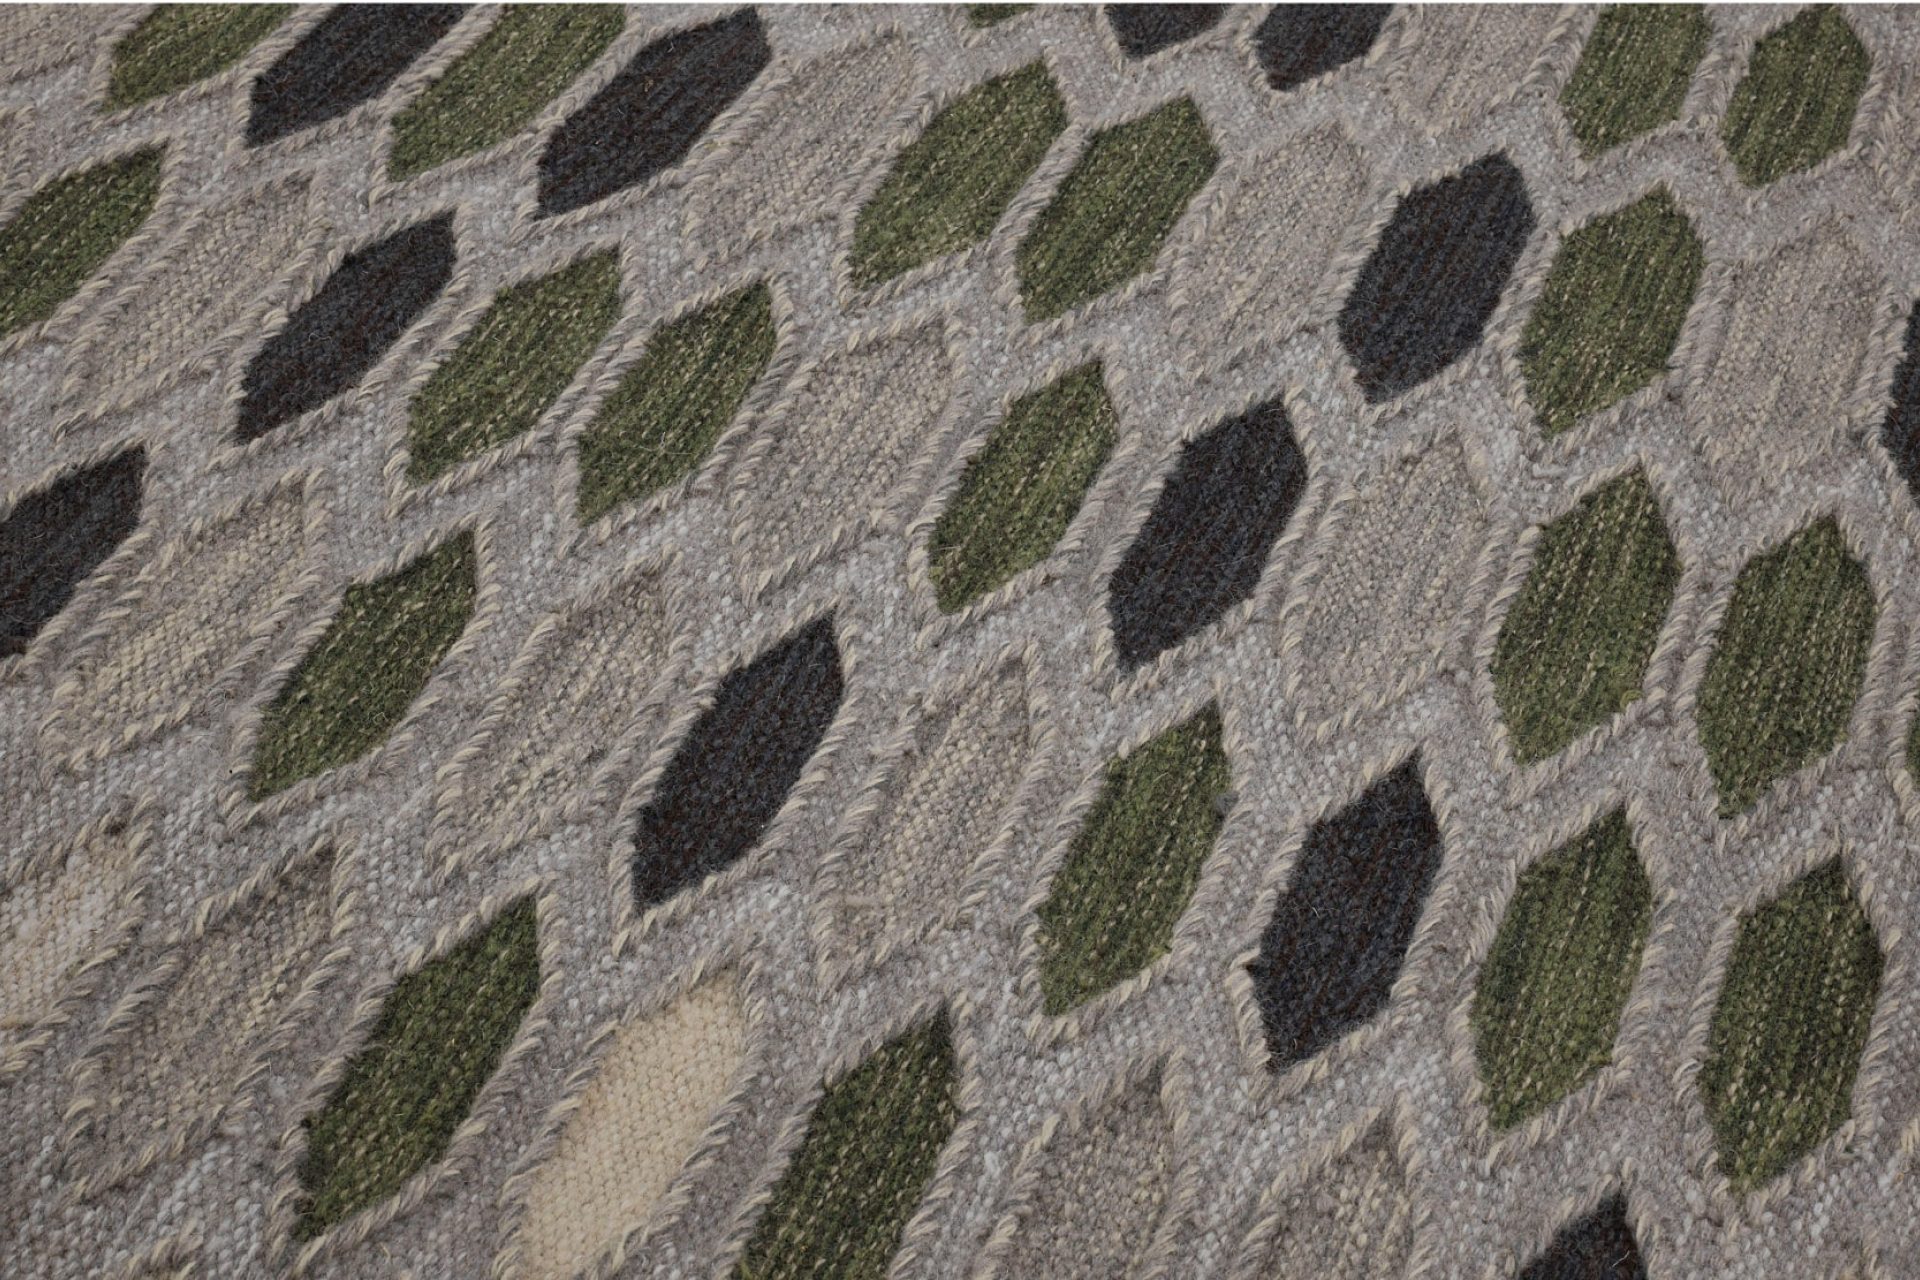 Image showing a section of a designer rug with an hexagonal pattern in beige, green and grey